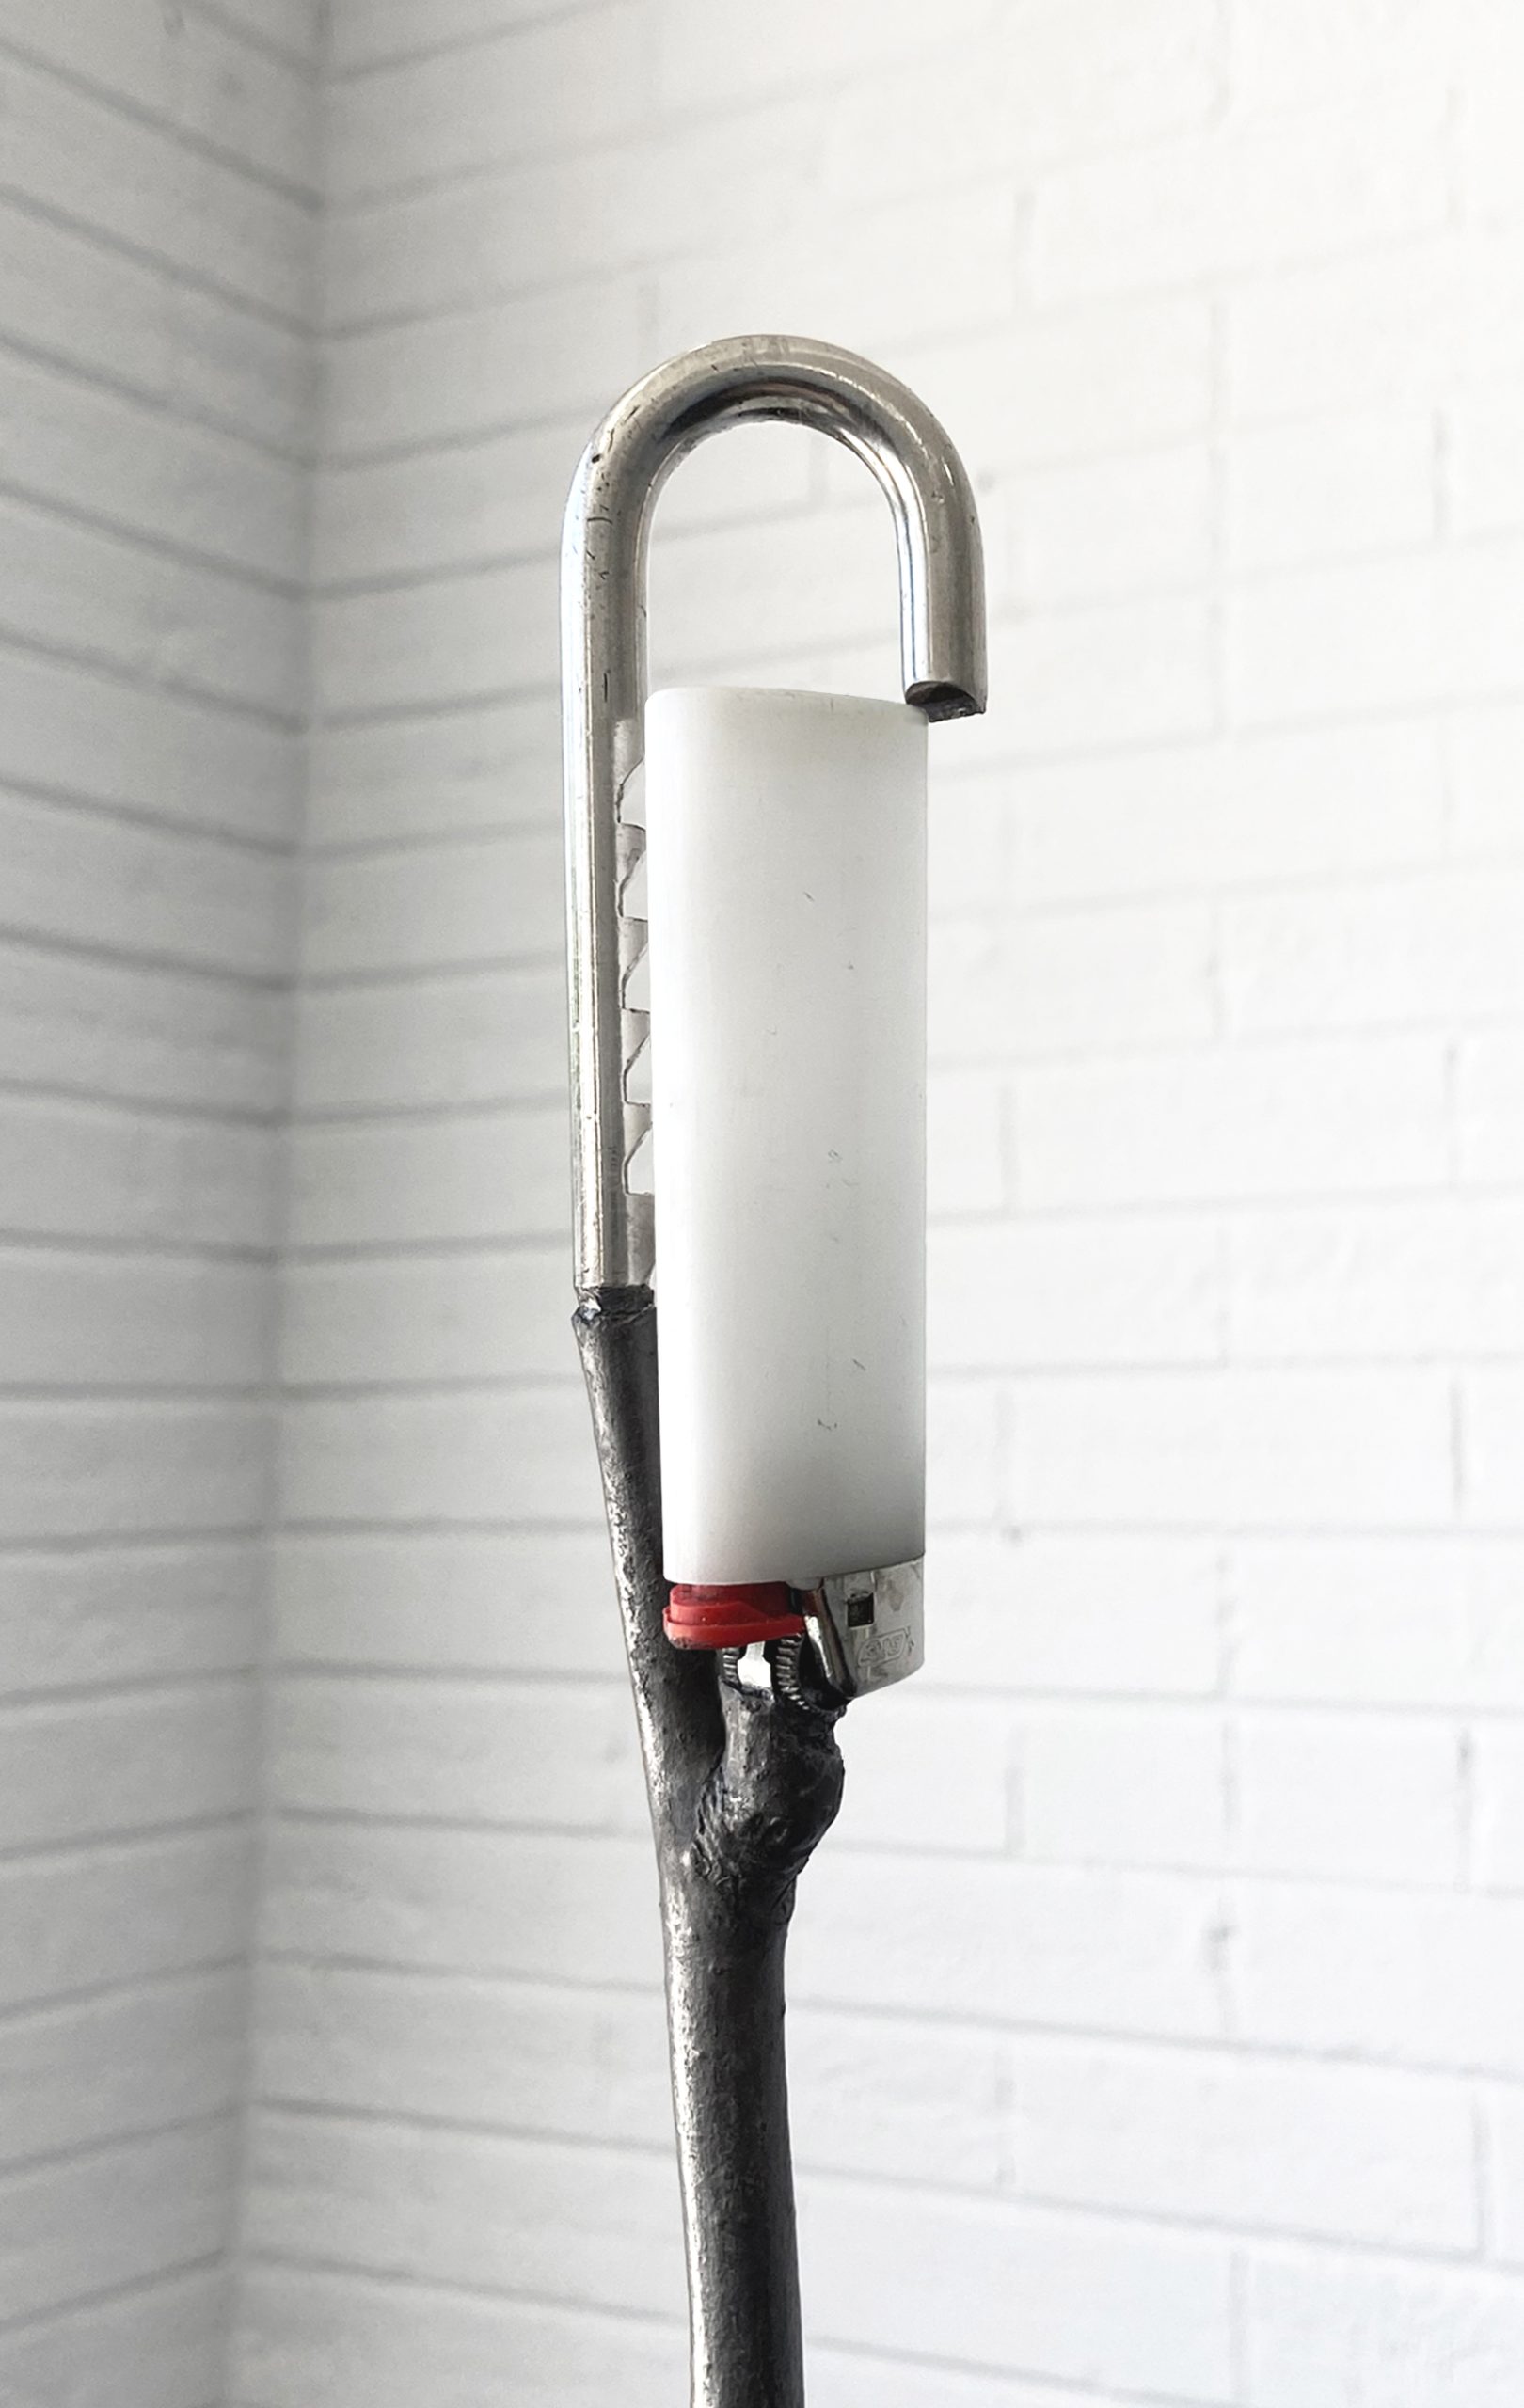 Image: Gary LaPointe Jr., ( western smoke ),2022, interlocking hitch ball, graphite treated spent firework cylinder and tree branch, nickel-plated steel O- rings, found empty lighter and half- cut hardened steel padlock shackle, 11 x 2 x 45.5”. A detail view of the top of the sculpture where a white lighter is held in the grip of a metal part attached to the branch. Image courtesy of Roman Susan.